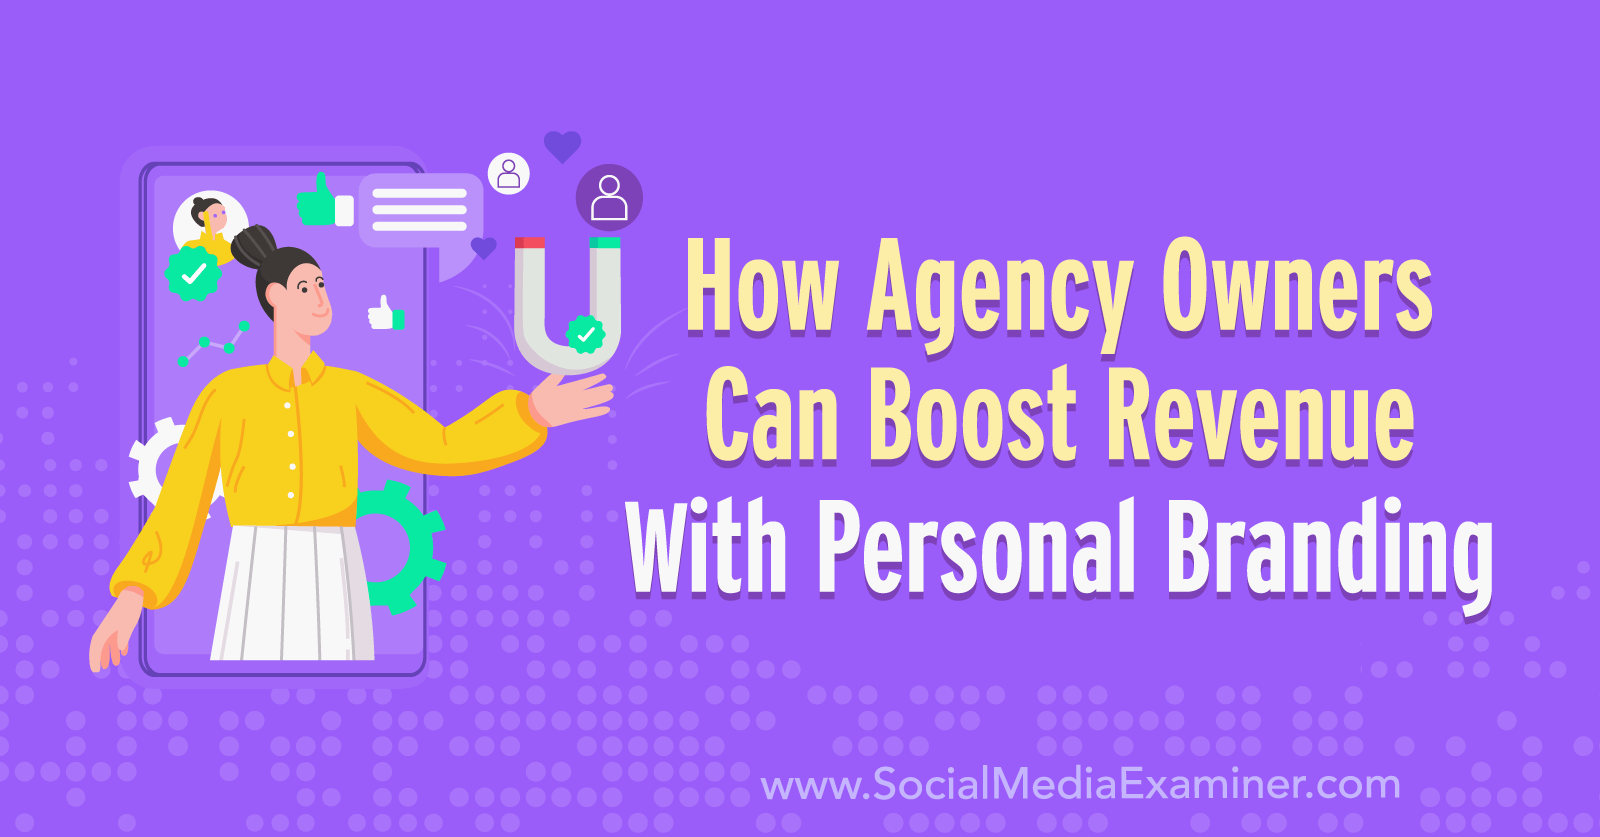 The Influencer Advantage: How Agency Owners Can Boost Revenue With Personal Branding by Social Media Examiner